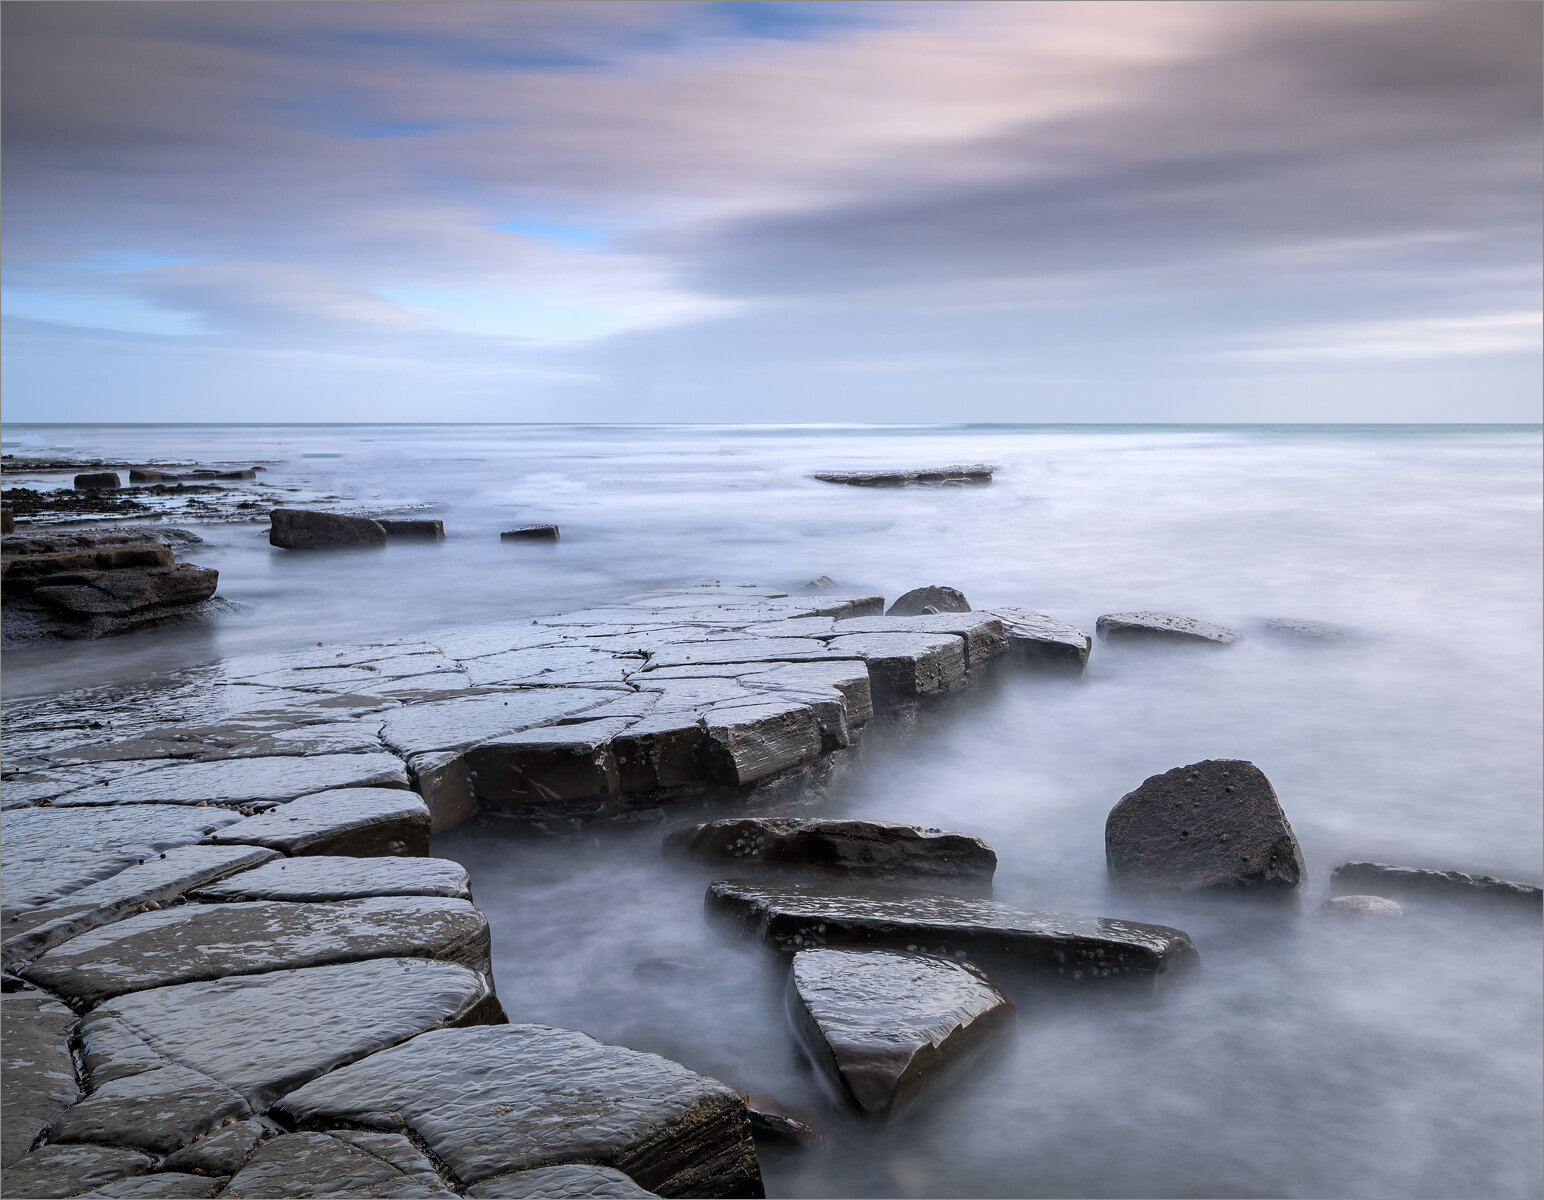 CLAVELL'S LEDGE AT KIMMERIDGE - Maurice Young